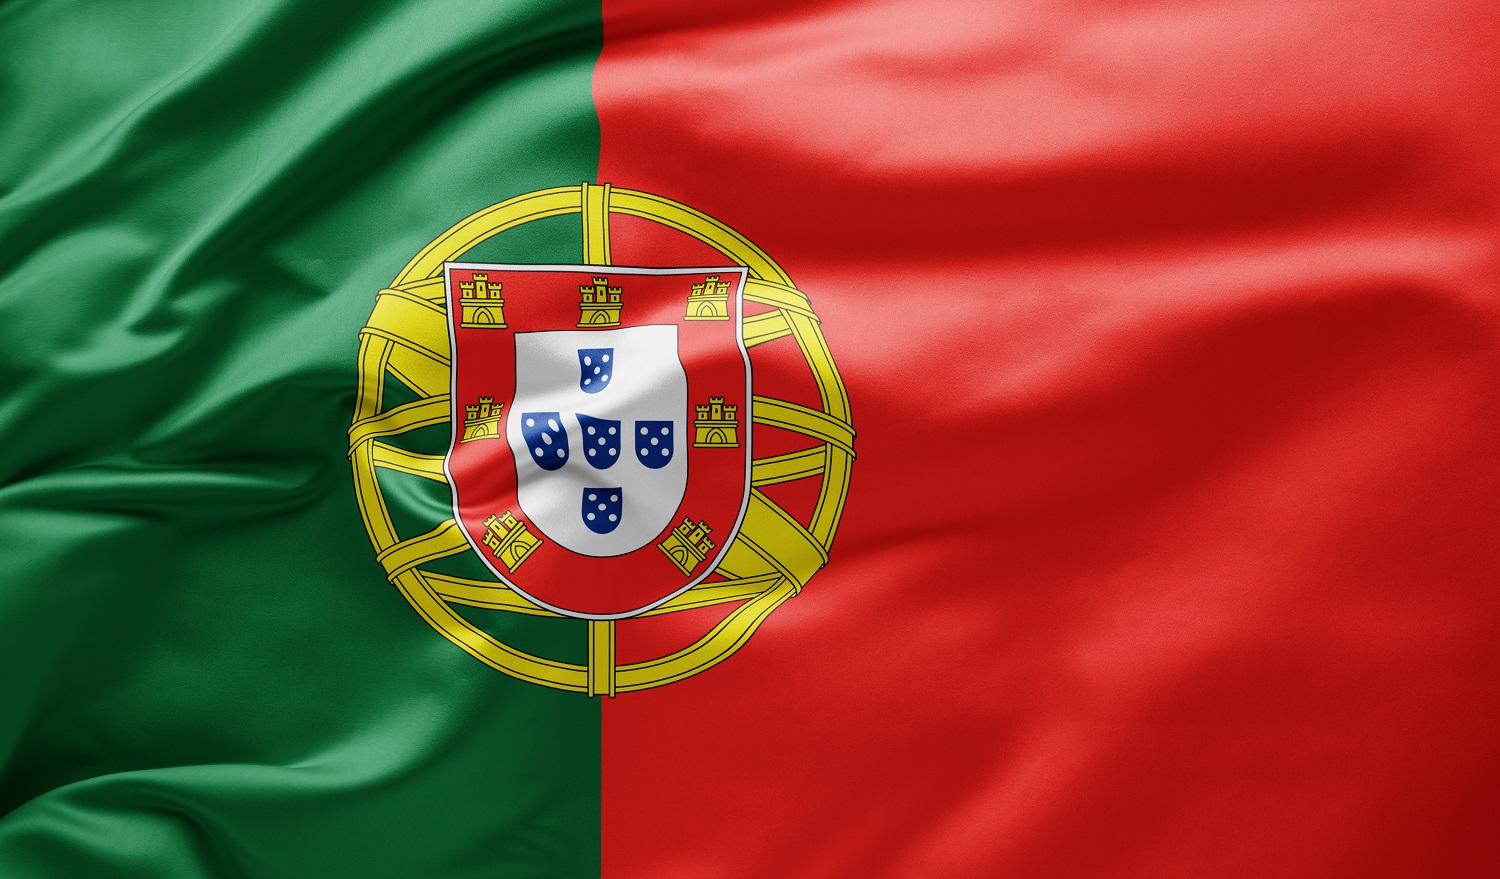 The national flag of Portugal.